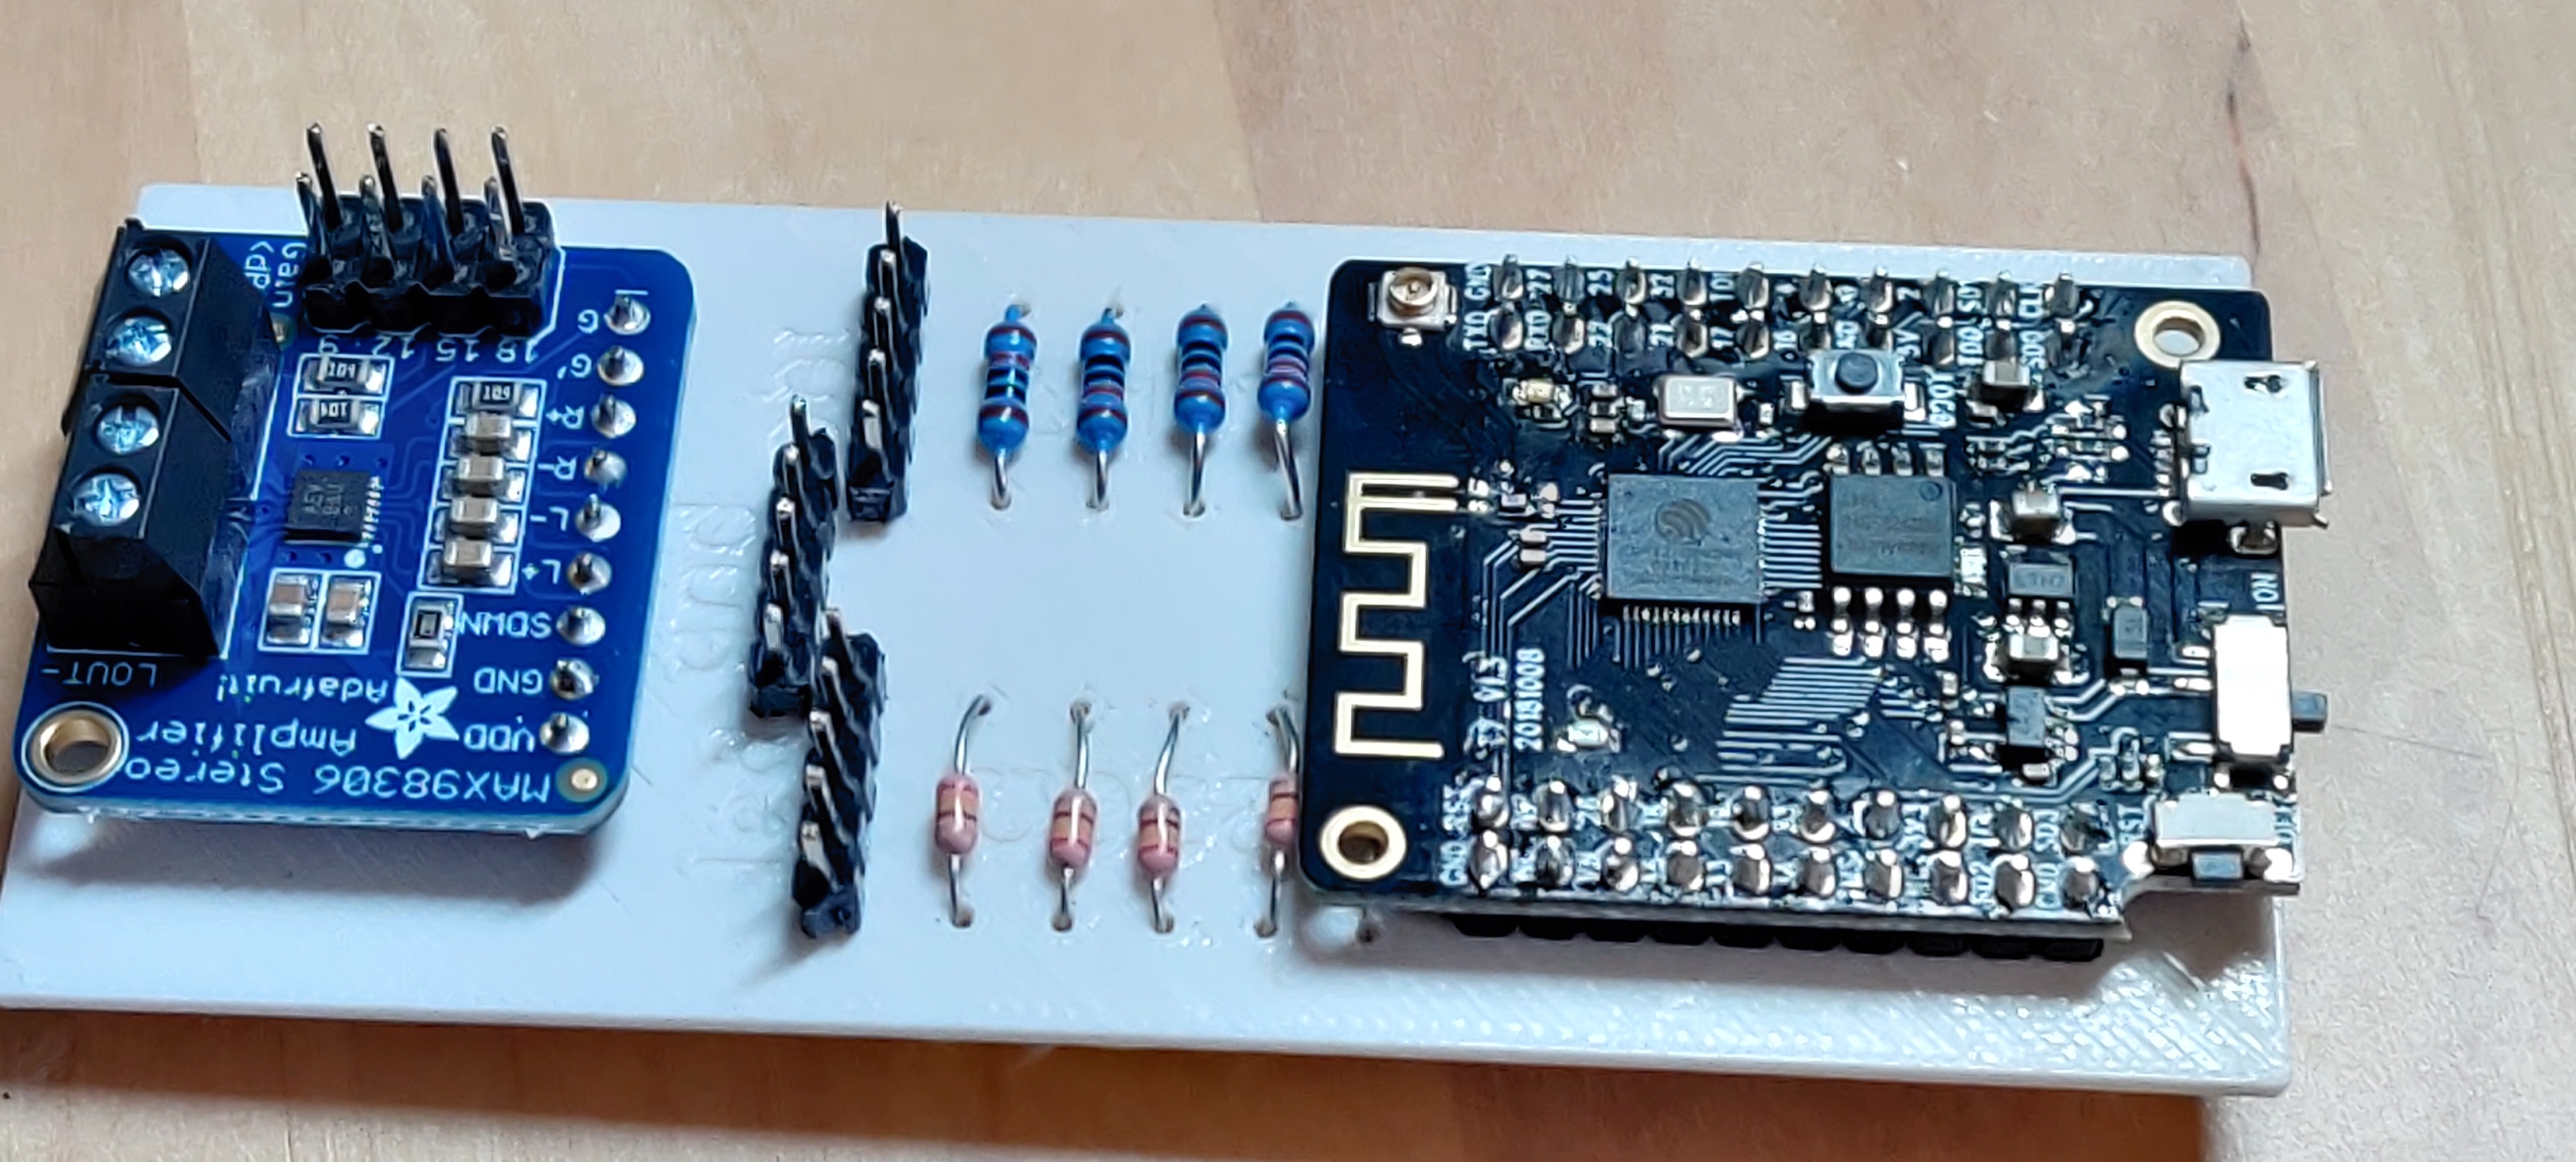 same board, with all the components placed on it. The "led",
"gnd" and "pht" holes hold connectors